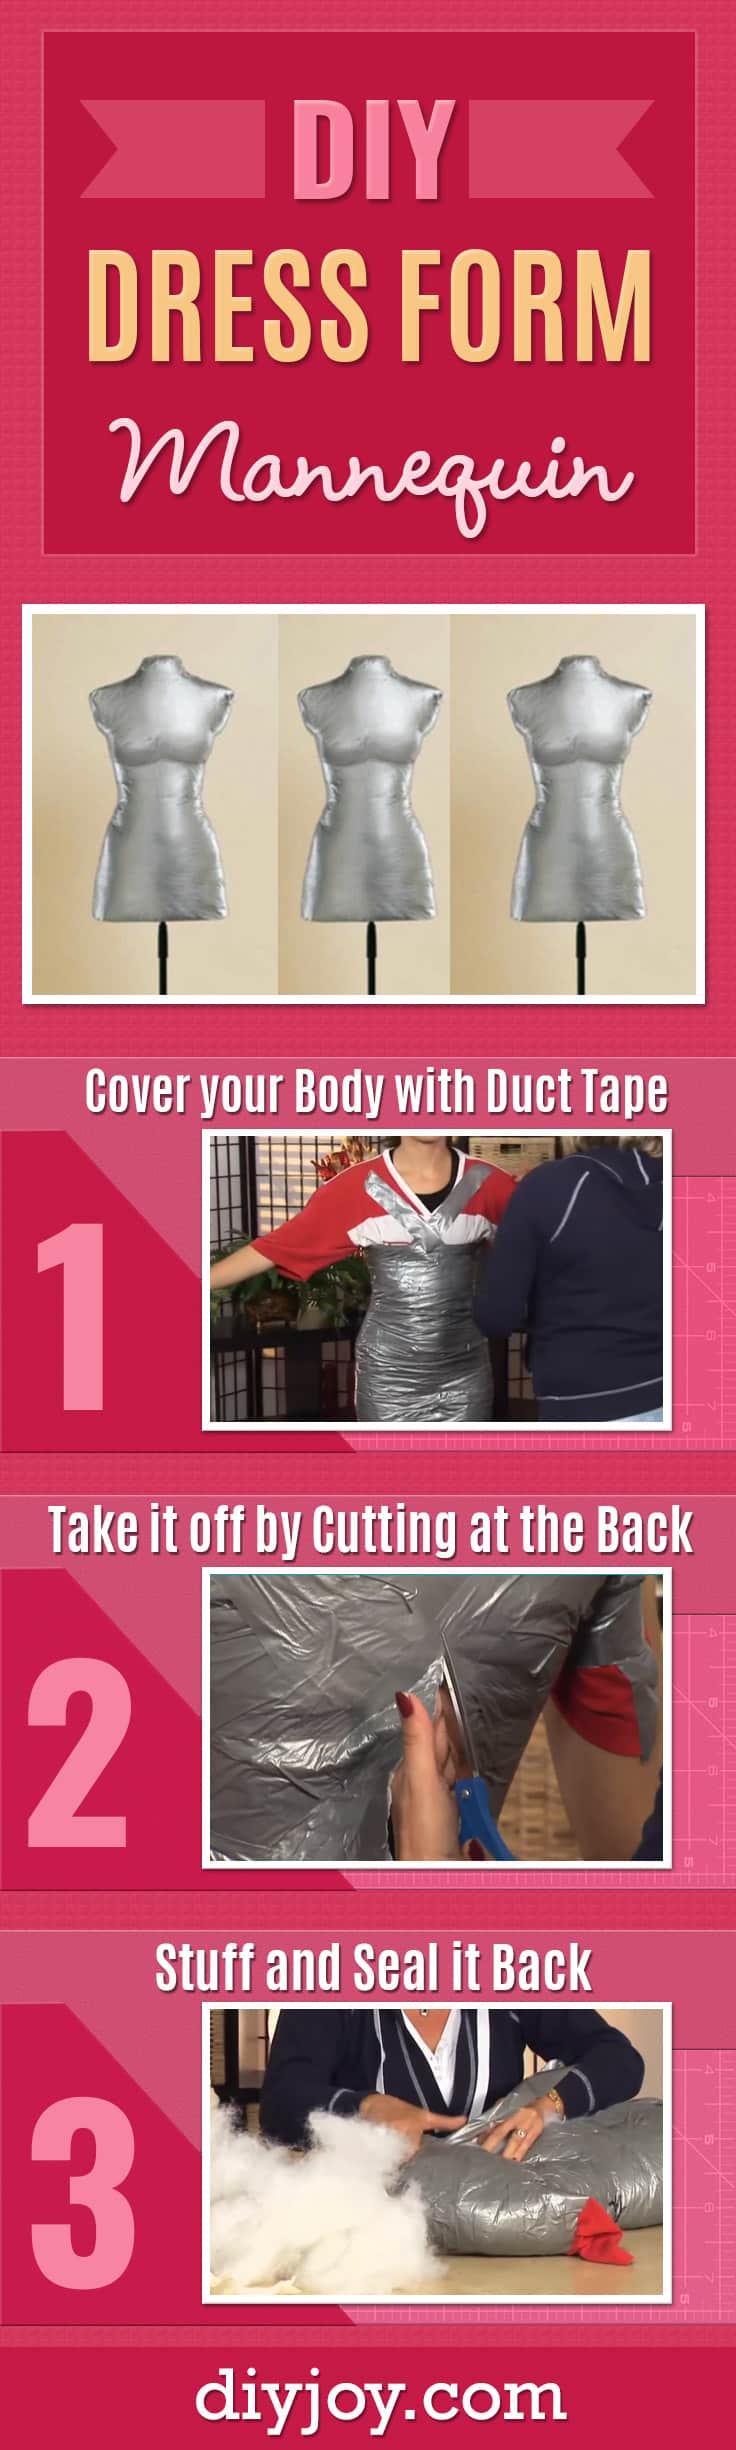 DIY Dress Form For Easy Sewing Projects - How to Make a Mannequin to Sew Clothes and Patterns - https://diyjoy.com/diy-dress-form